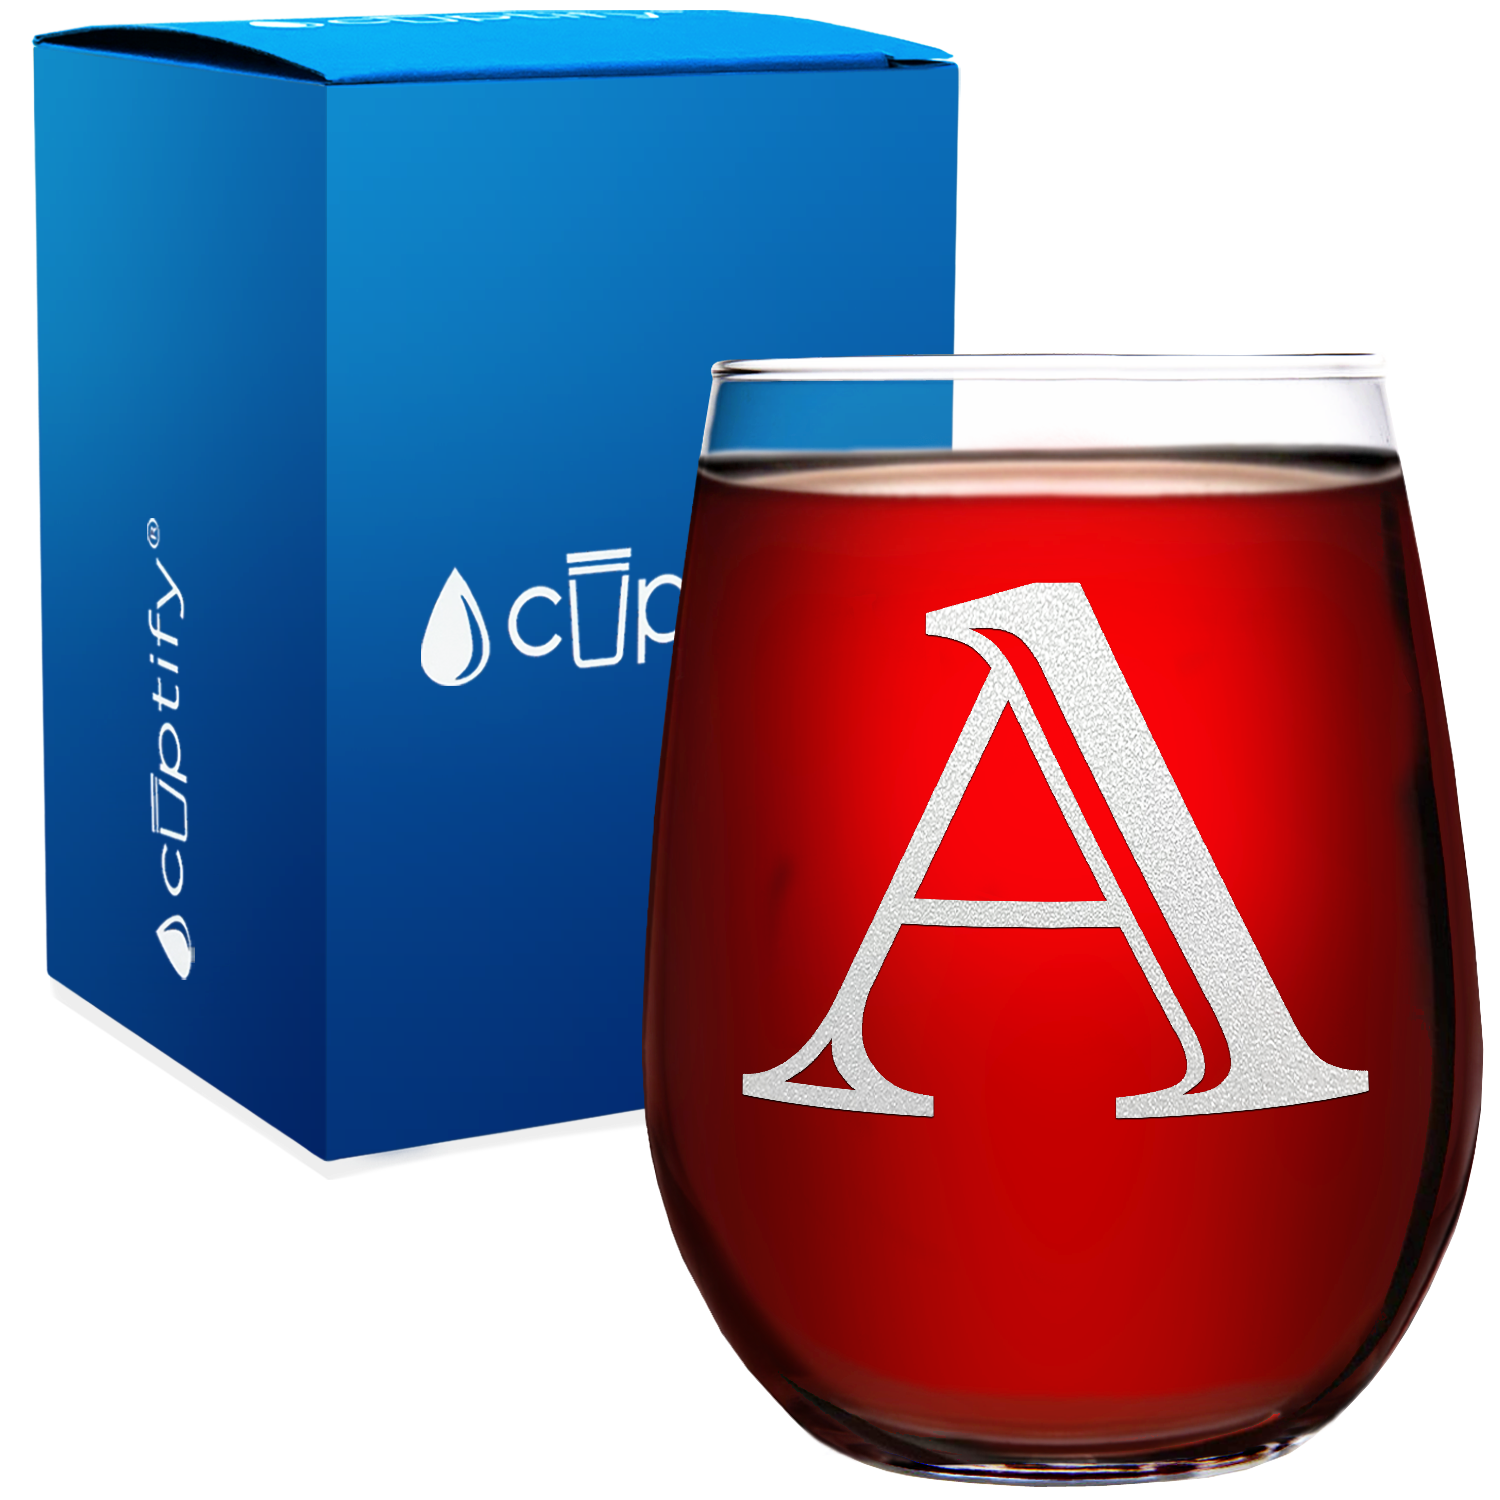 Monogram Initial Letter A 17oz Stemless Wine Glass